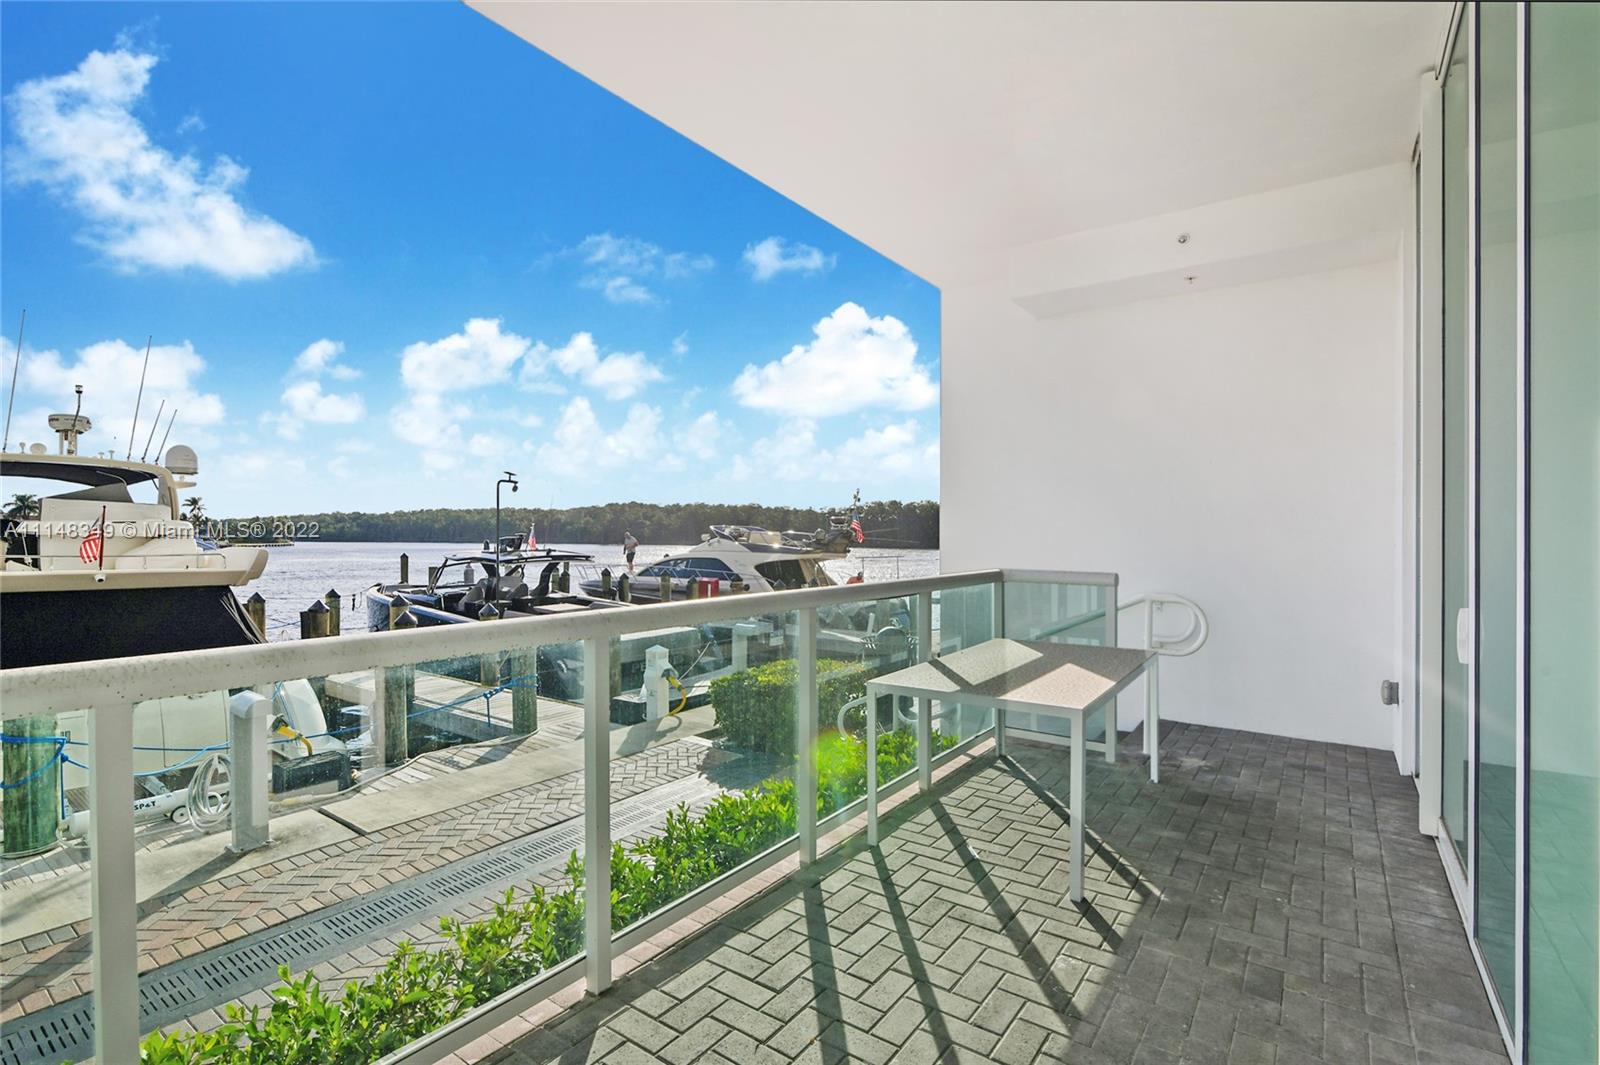 Amazing ground level condo with 2 bed + den and 3 full bath. Unit is fully furnished. Breathtaking direct bay and marina views. Building offers all amenities such as fitness center and spa, Olympic sized pool, heated pool and tennis courts. Valet available 24hrs.